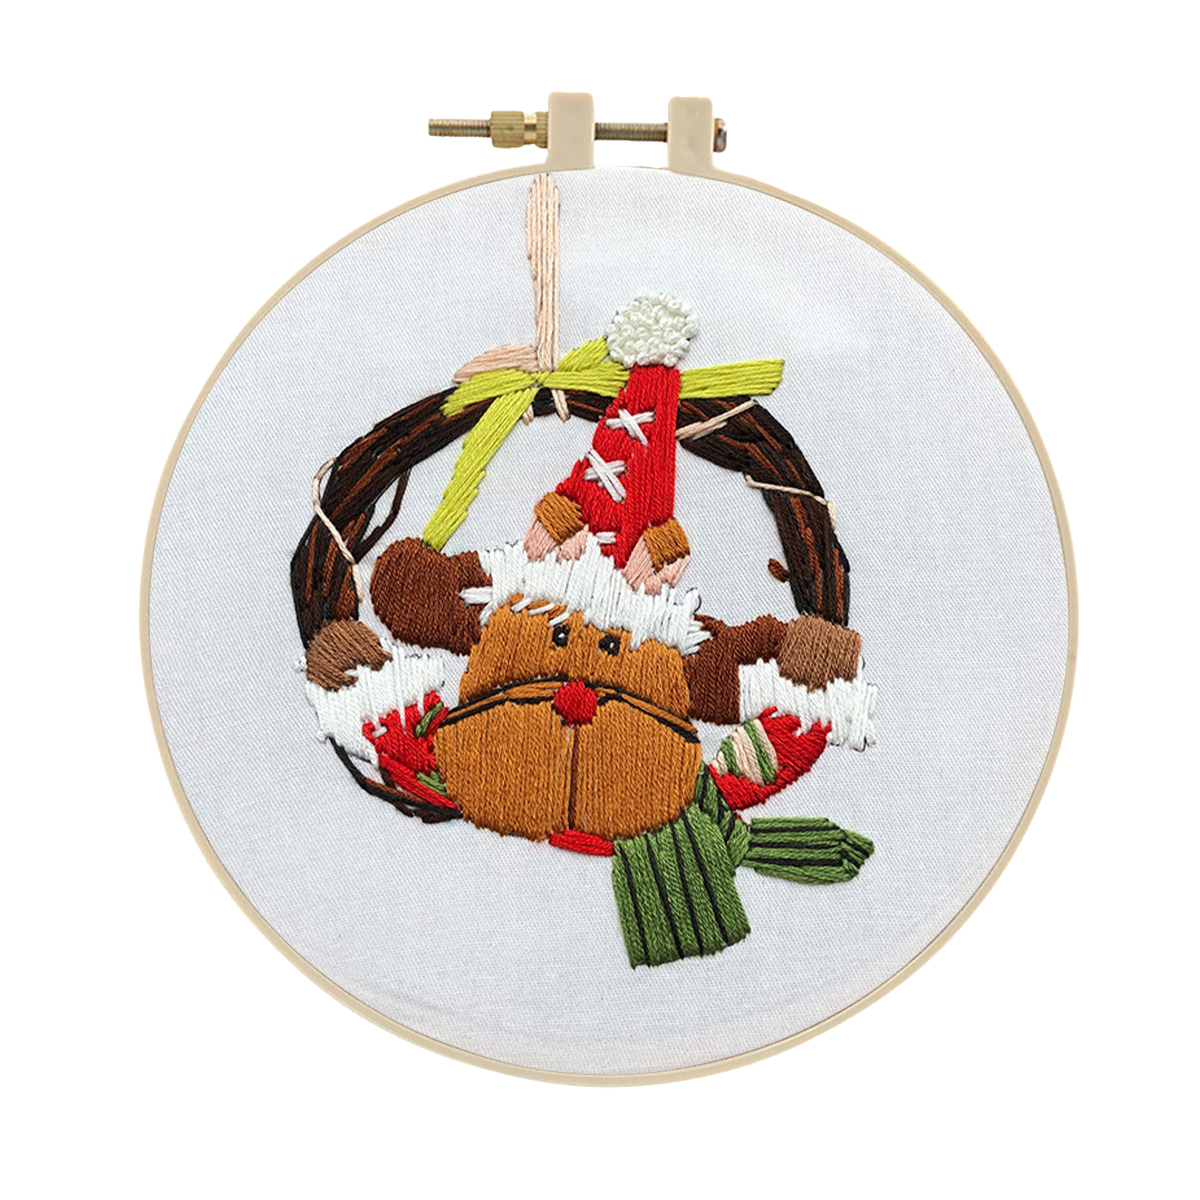 Christmas Embroidery Kits Cross stitch kits for Adult Beginner - Hat Elk Pattern